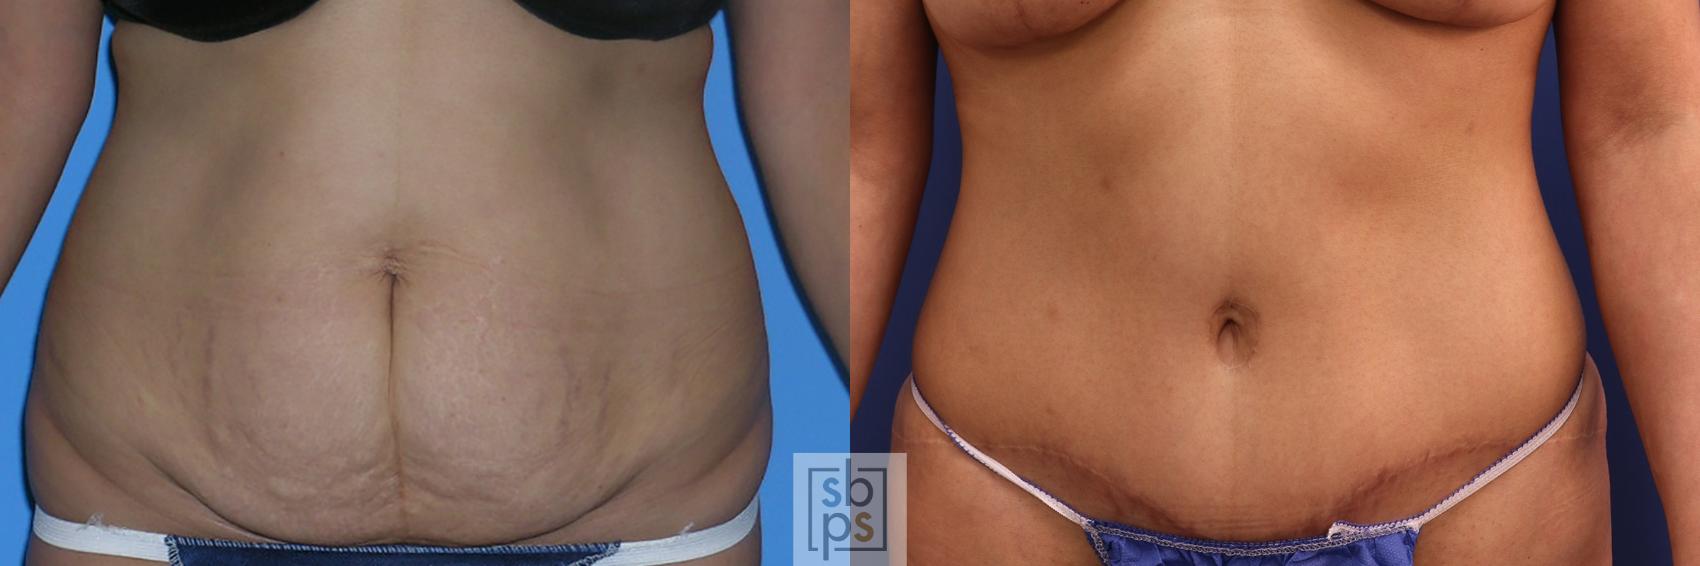 Before & After Tummy Tuck Case 384 Front View in Torrance, CA